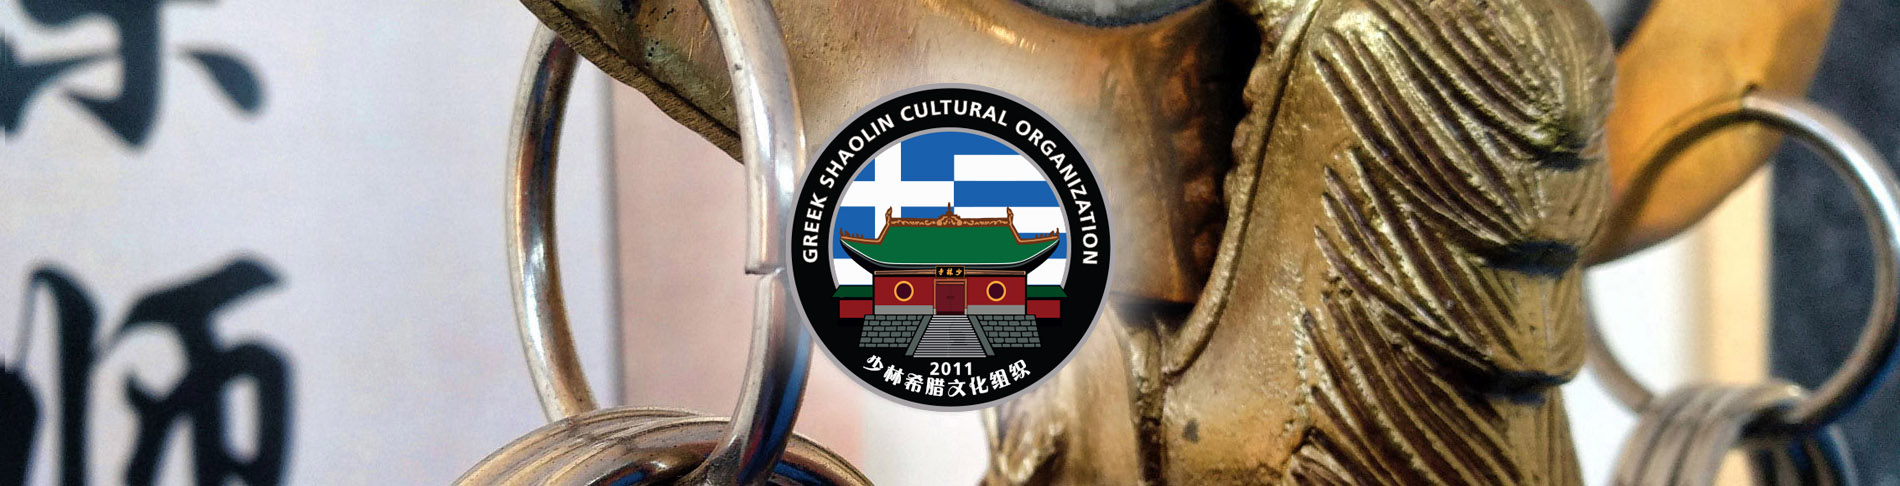 History of Our Cultural Center